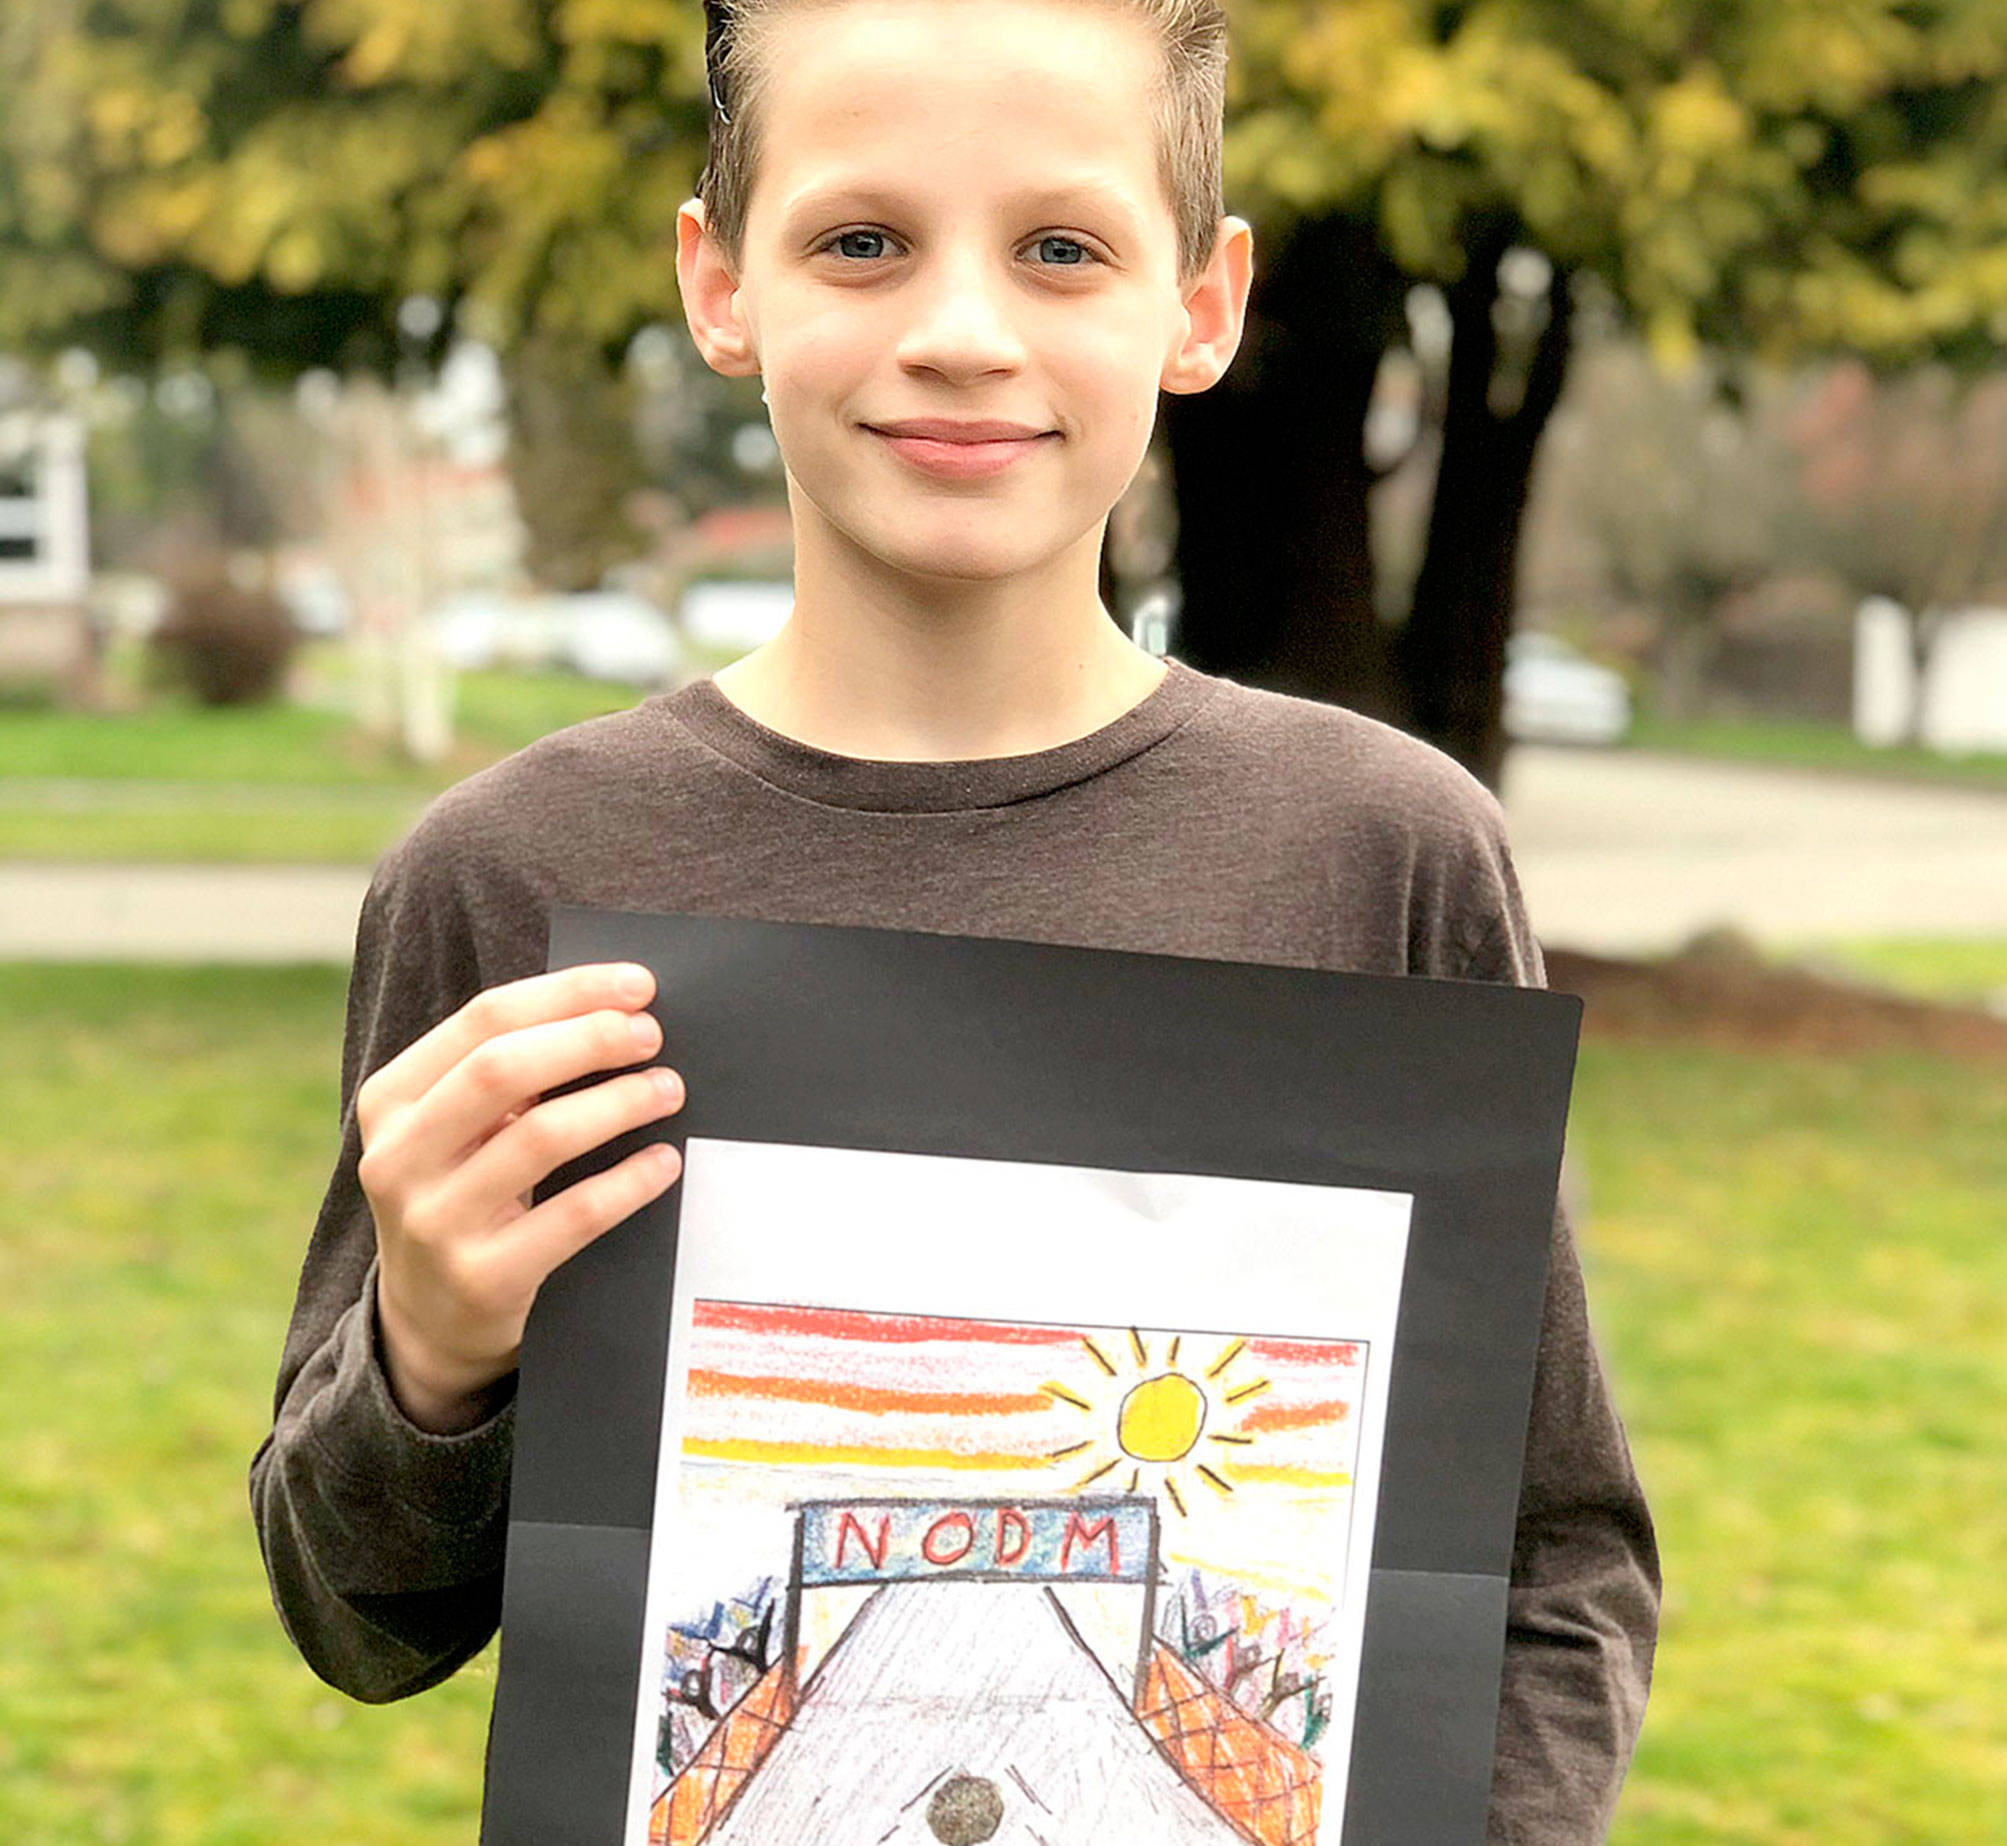 North Olympic Discovery Marathon
John Ruddell, 12, is the Grand Prize winner of the North Olympic Discovery Marathon kids medal design contest.